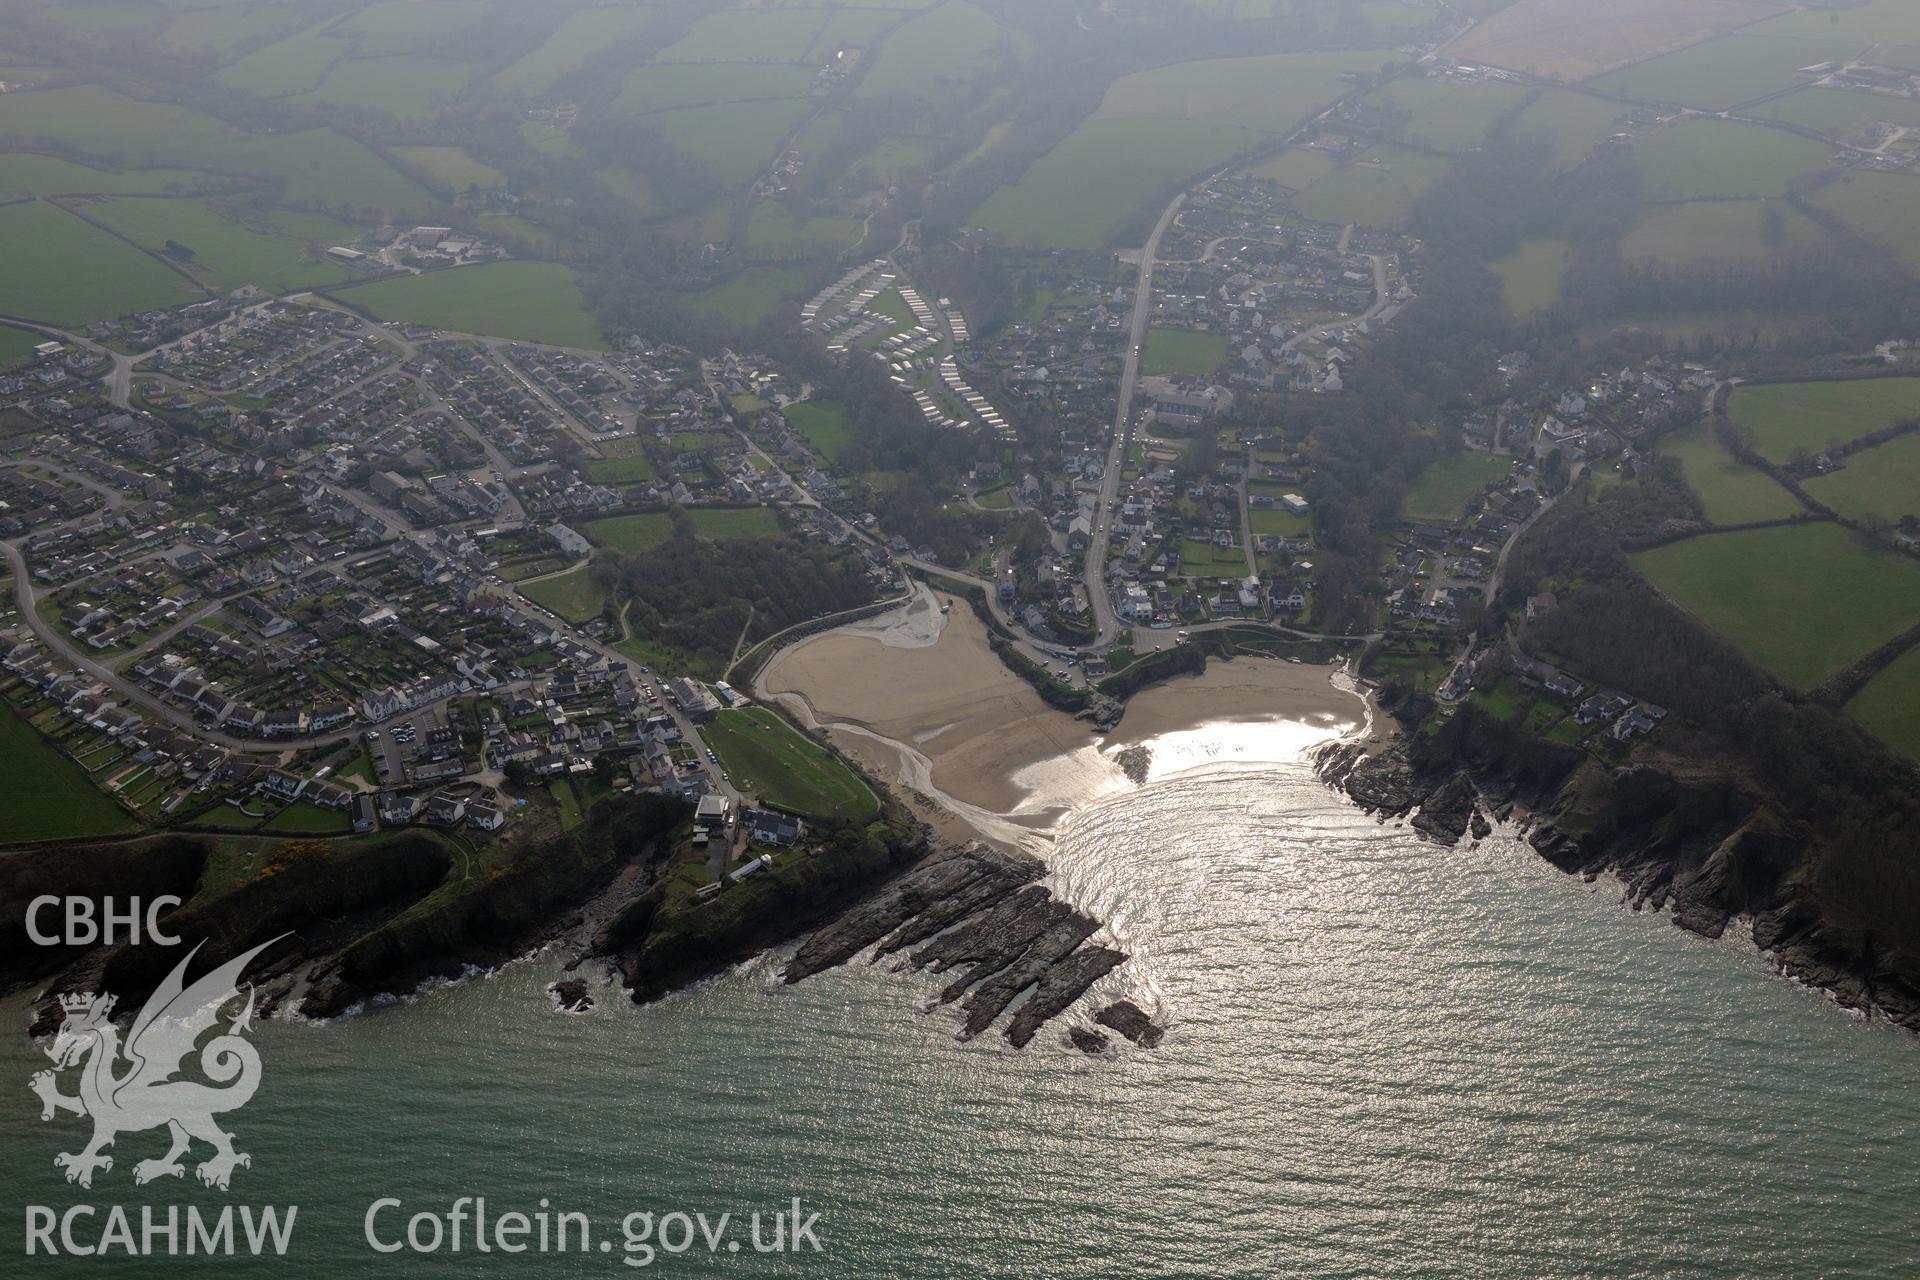 Aerial photography of Aberporth village taken on 27th March 2017. Baseline aerial reconnaissance survey for the CHERISH Project. ? Crown: CHERISH PROJECT 2017. Produced with EU funds through the Ireland Wales Co-operation Programme 2014-2020. All material made freely available through the Open Government Licence.